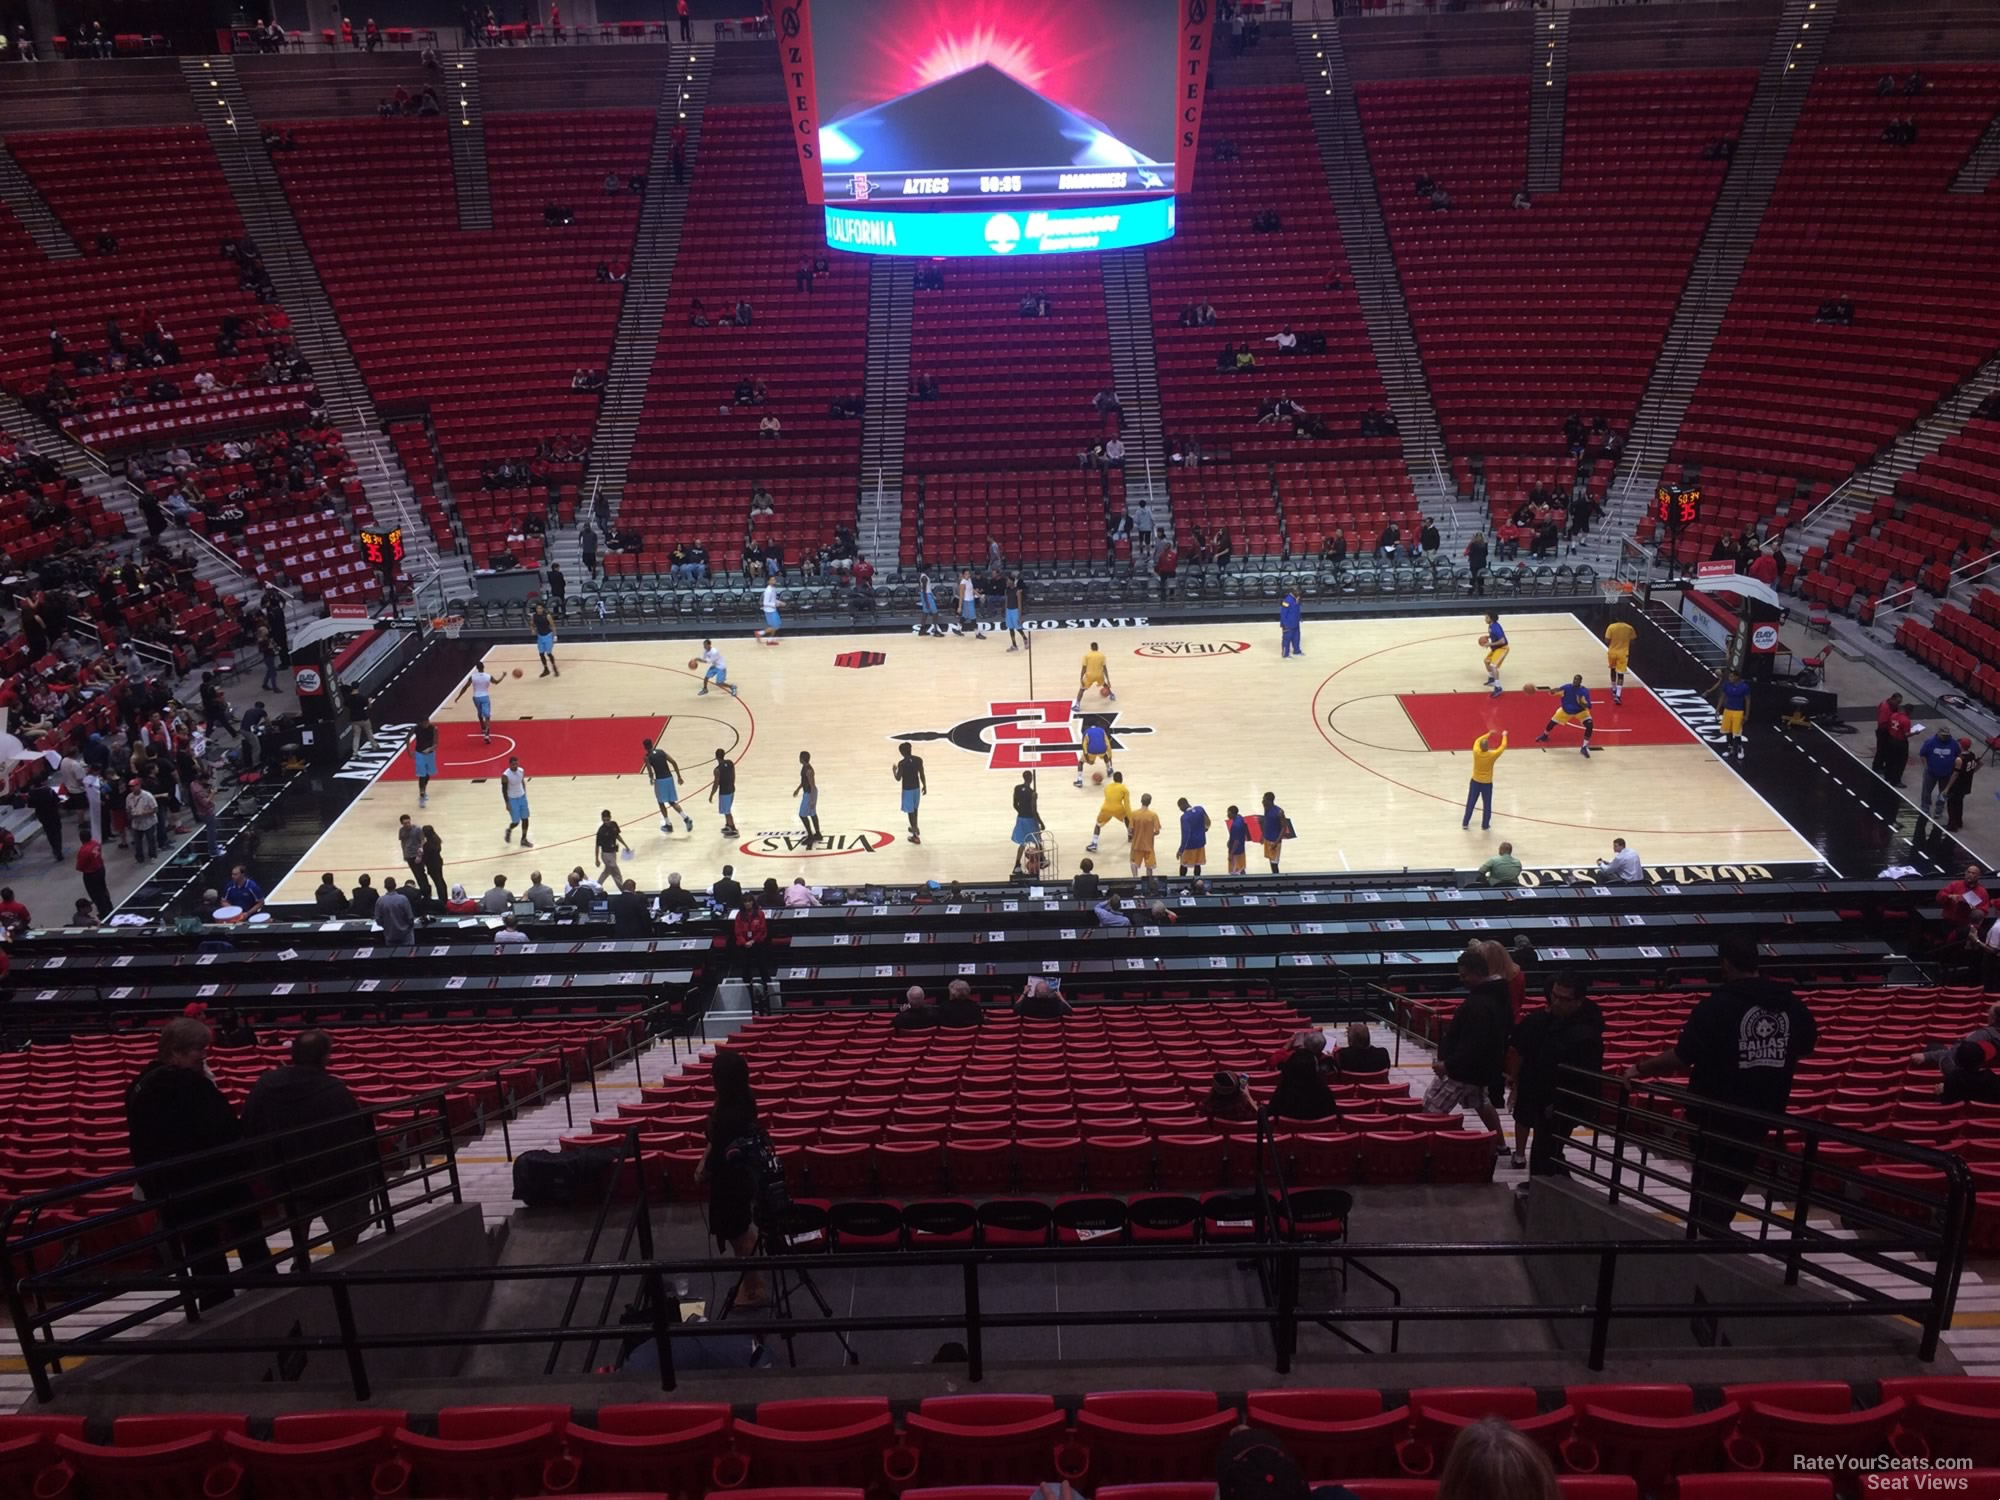 Section R at Viejas Arena 